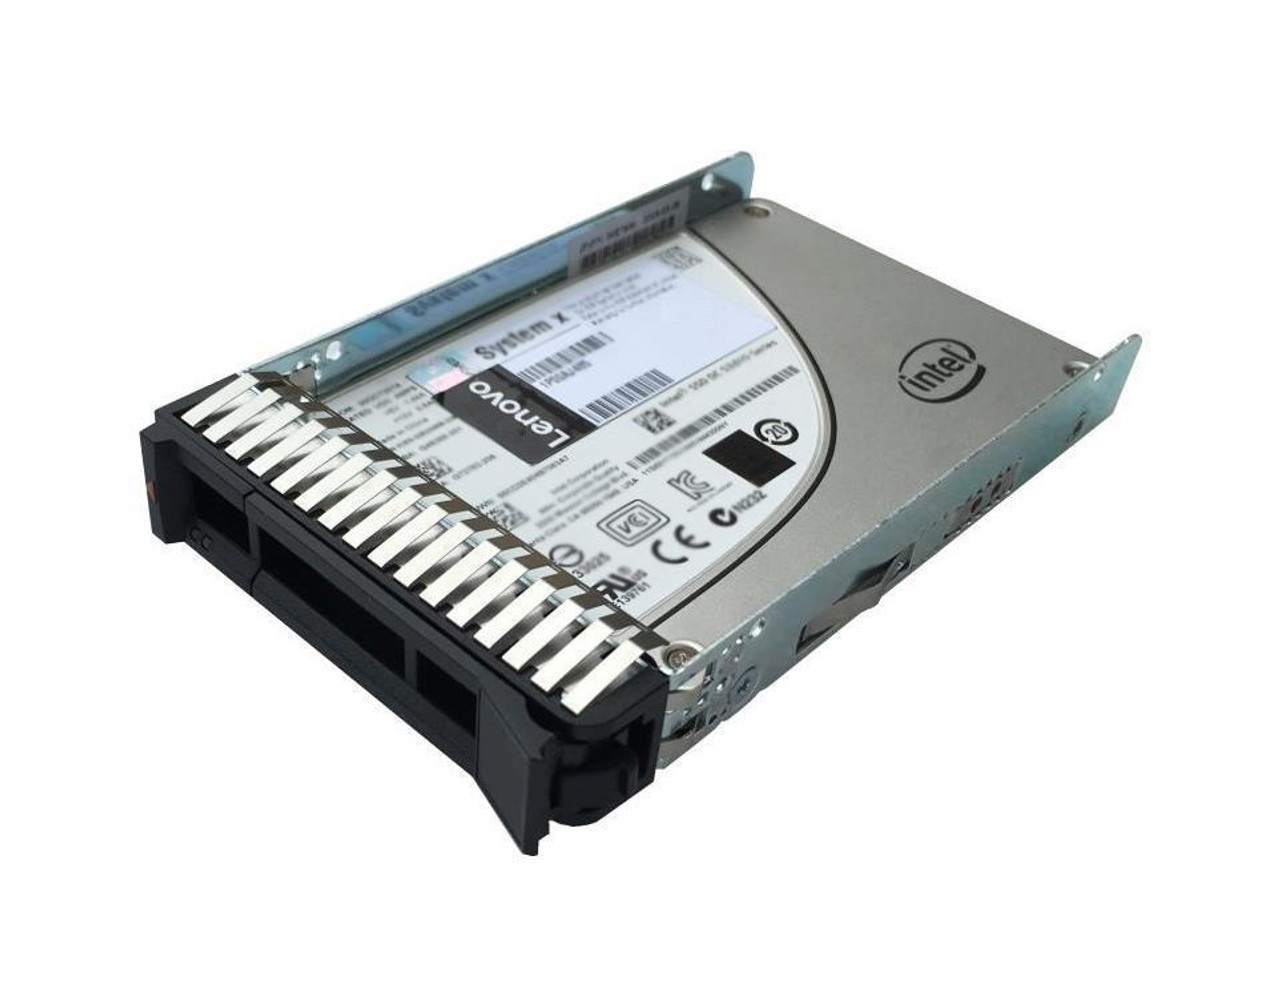 01GT779 Lenovo 960GB TLC Mainstream SATA 3.0 6Gbps Hot Swap 2.5-inch Internal Solid State Drive (SSD)